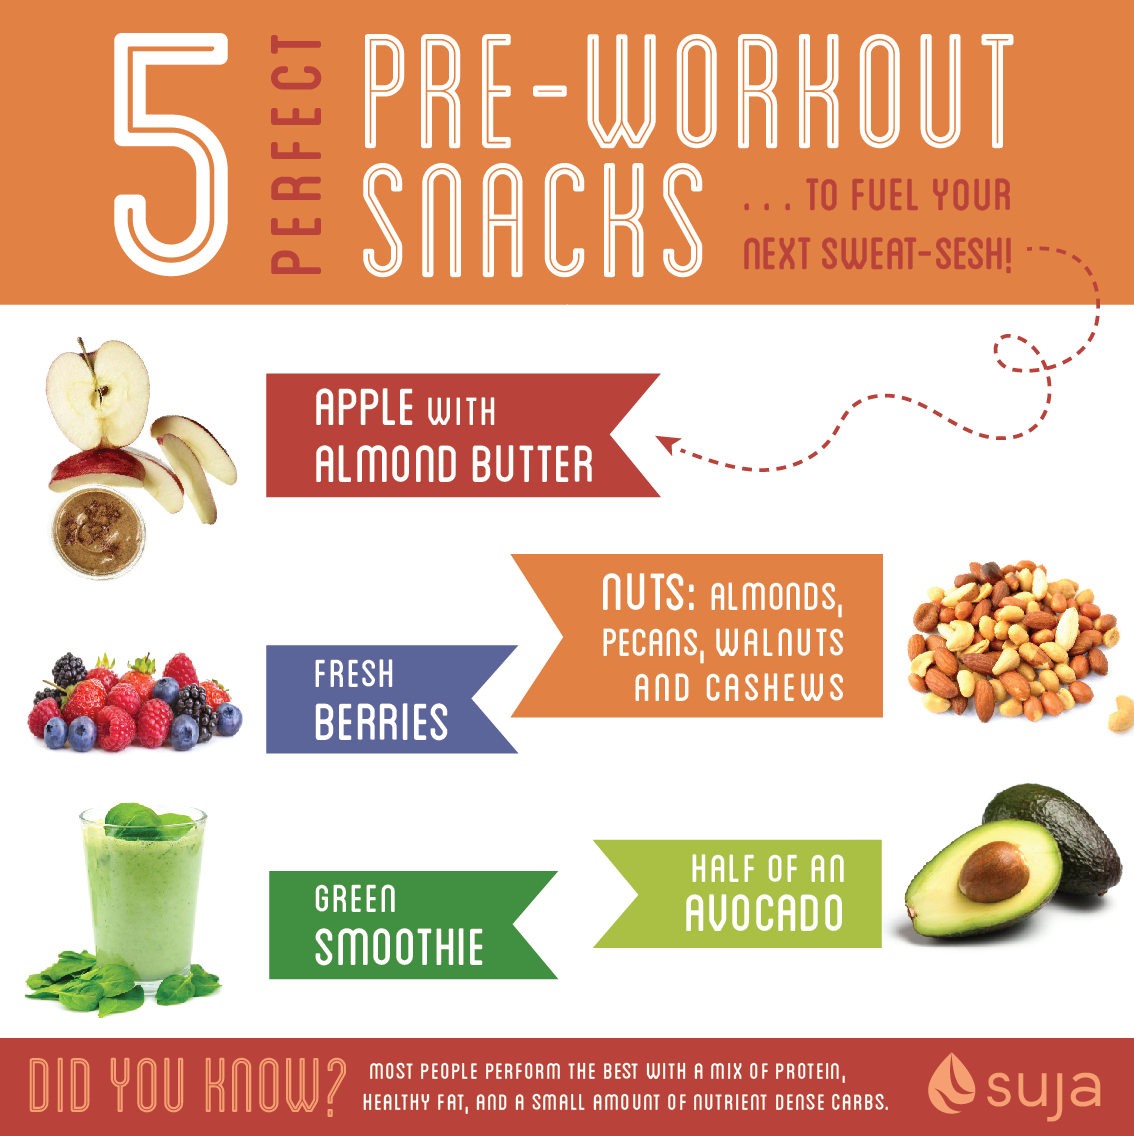 Pre Workout Snacks: 5 Foods to Fuel Your Sweat-Sesh